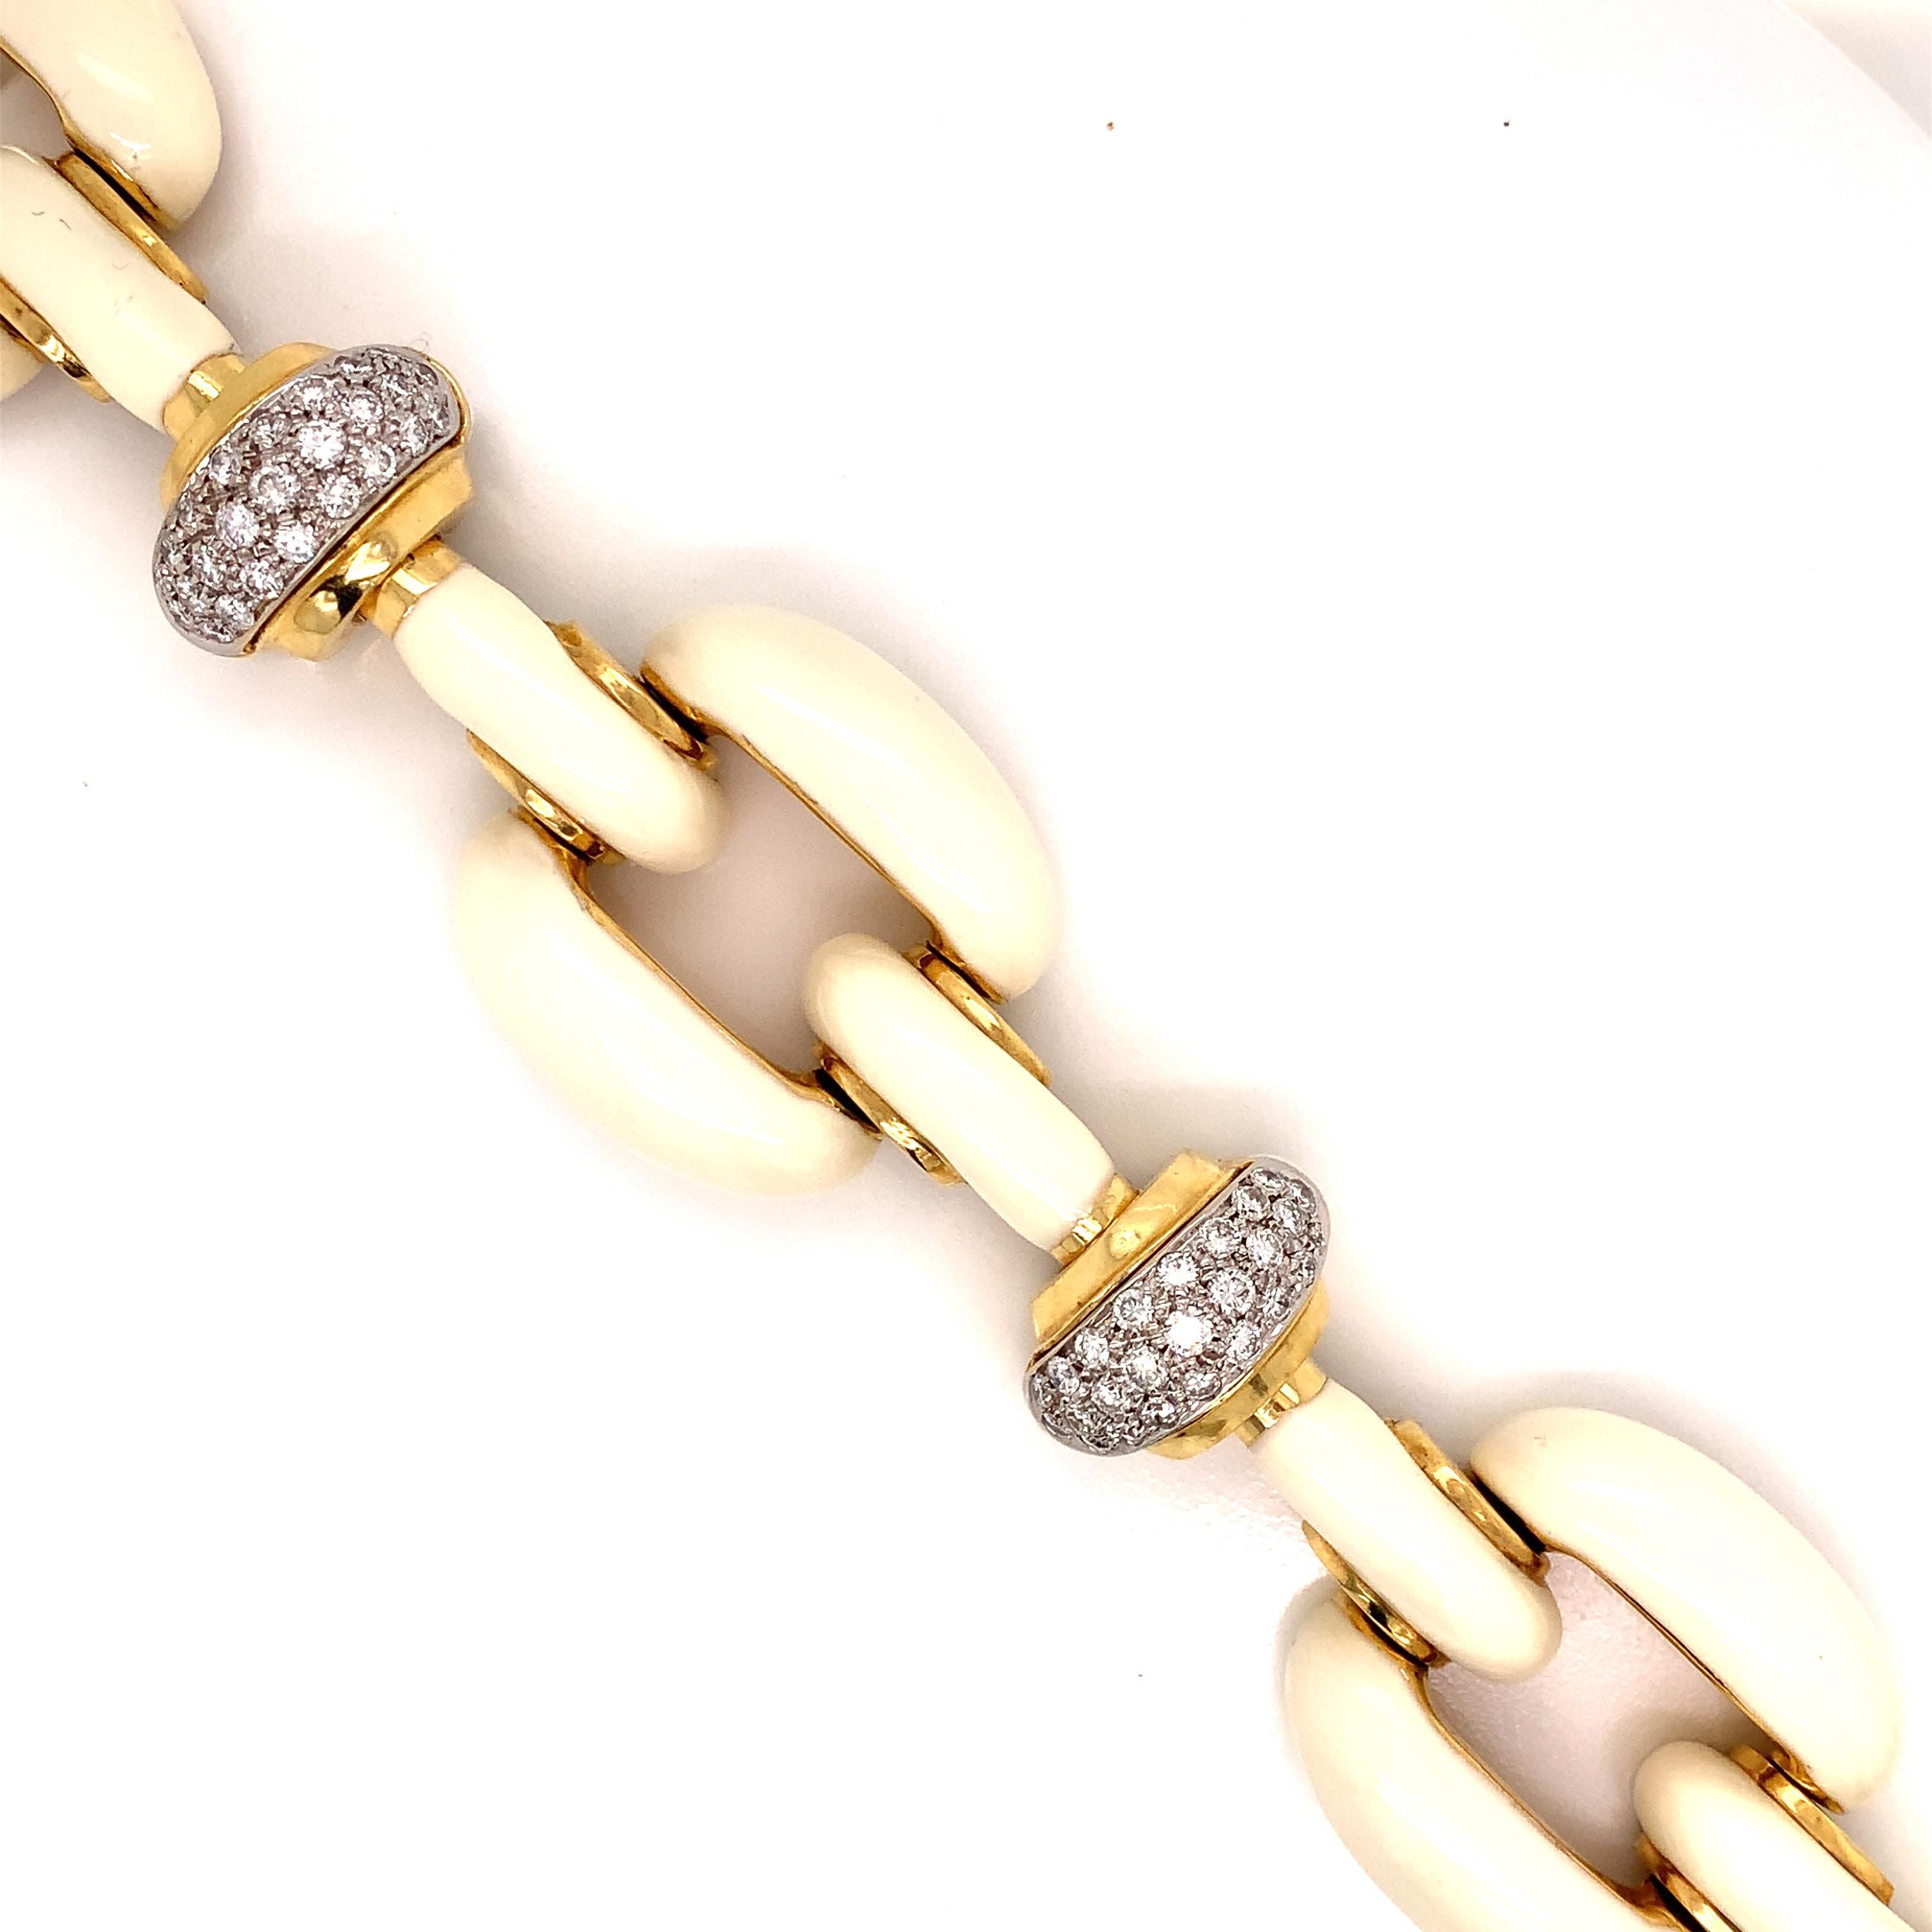 Creamy winter white enamel paired with 4.20 cttw diamonds and 66.40 grams of 18kt yellow gold make for a spectacular combination.  This Italian designed Roberto Legnazzi bracelet is beautifully made with fine attention to detail. This 7.25